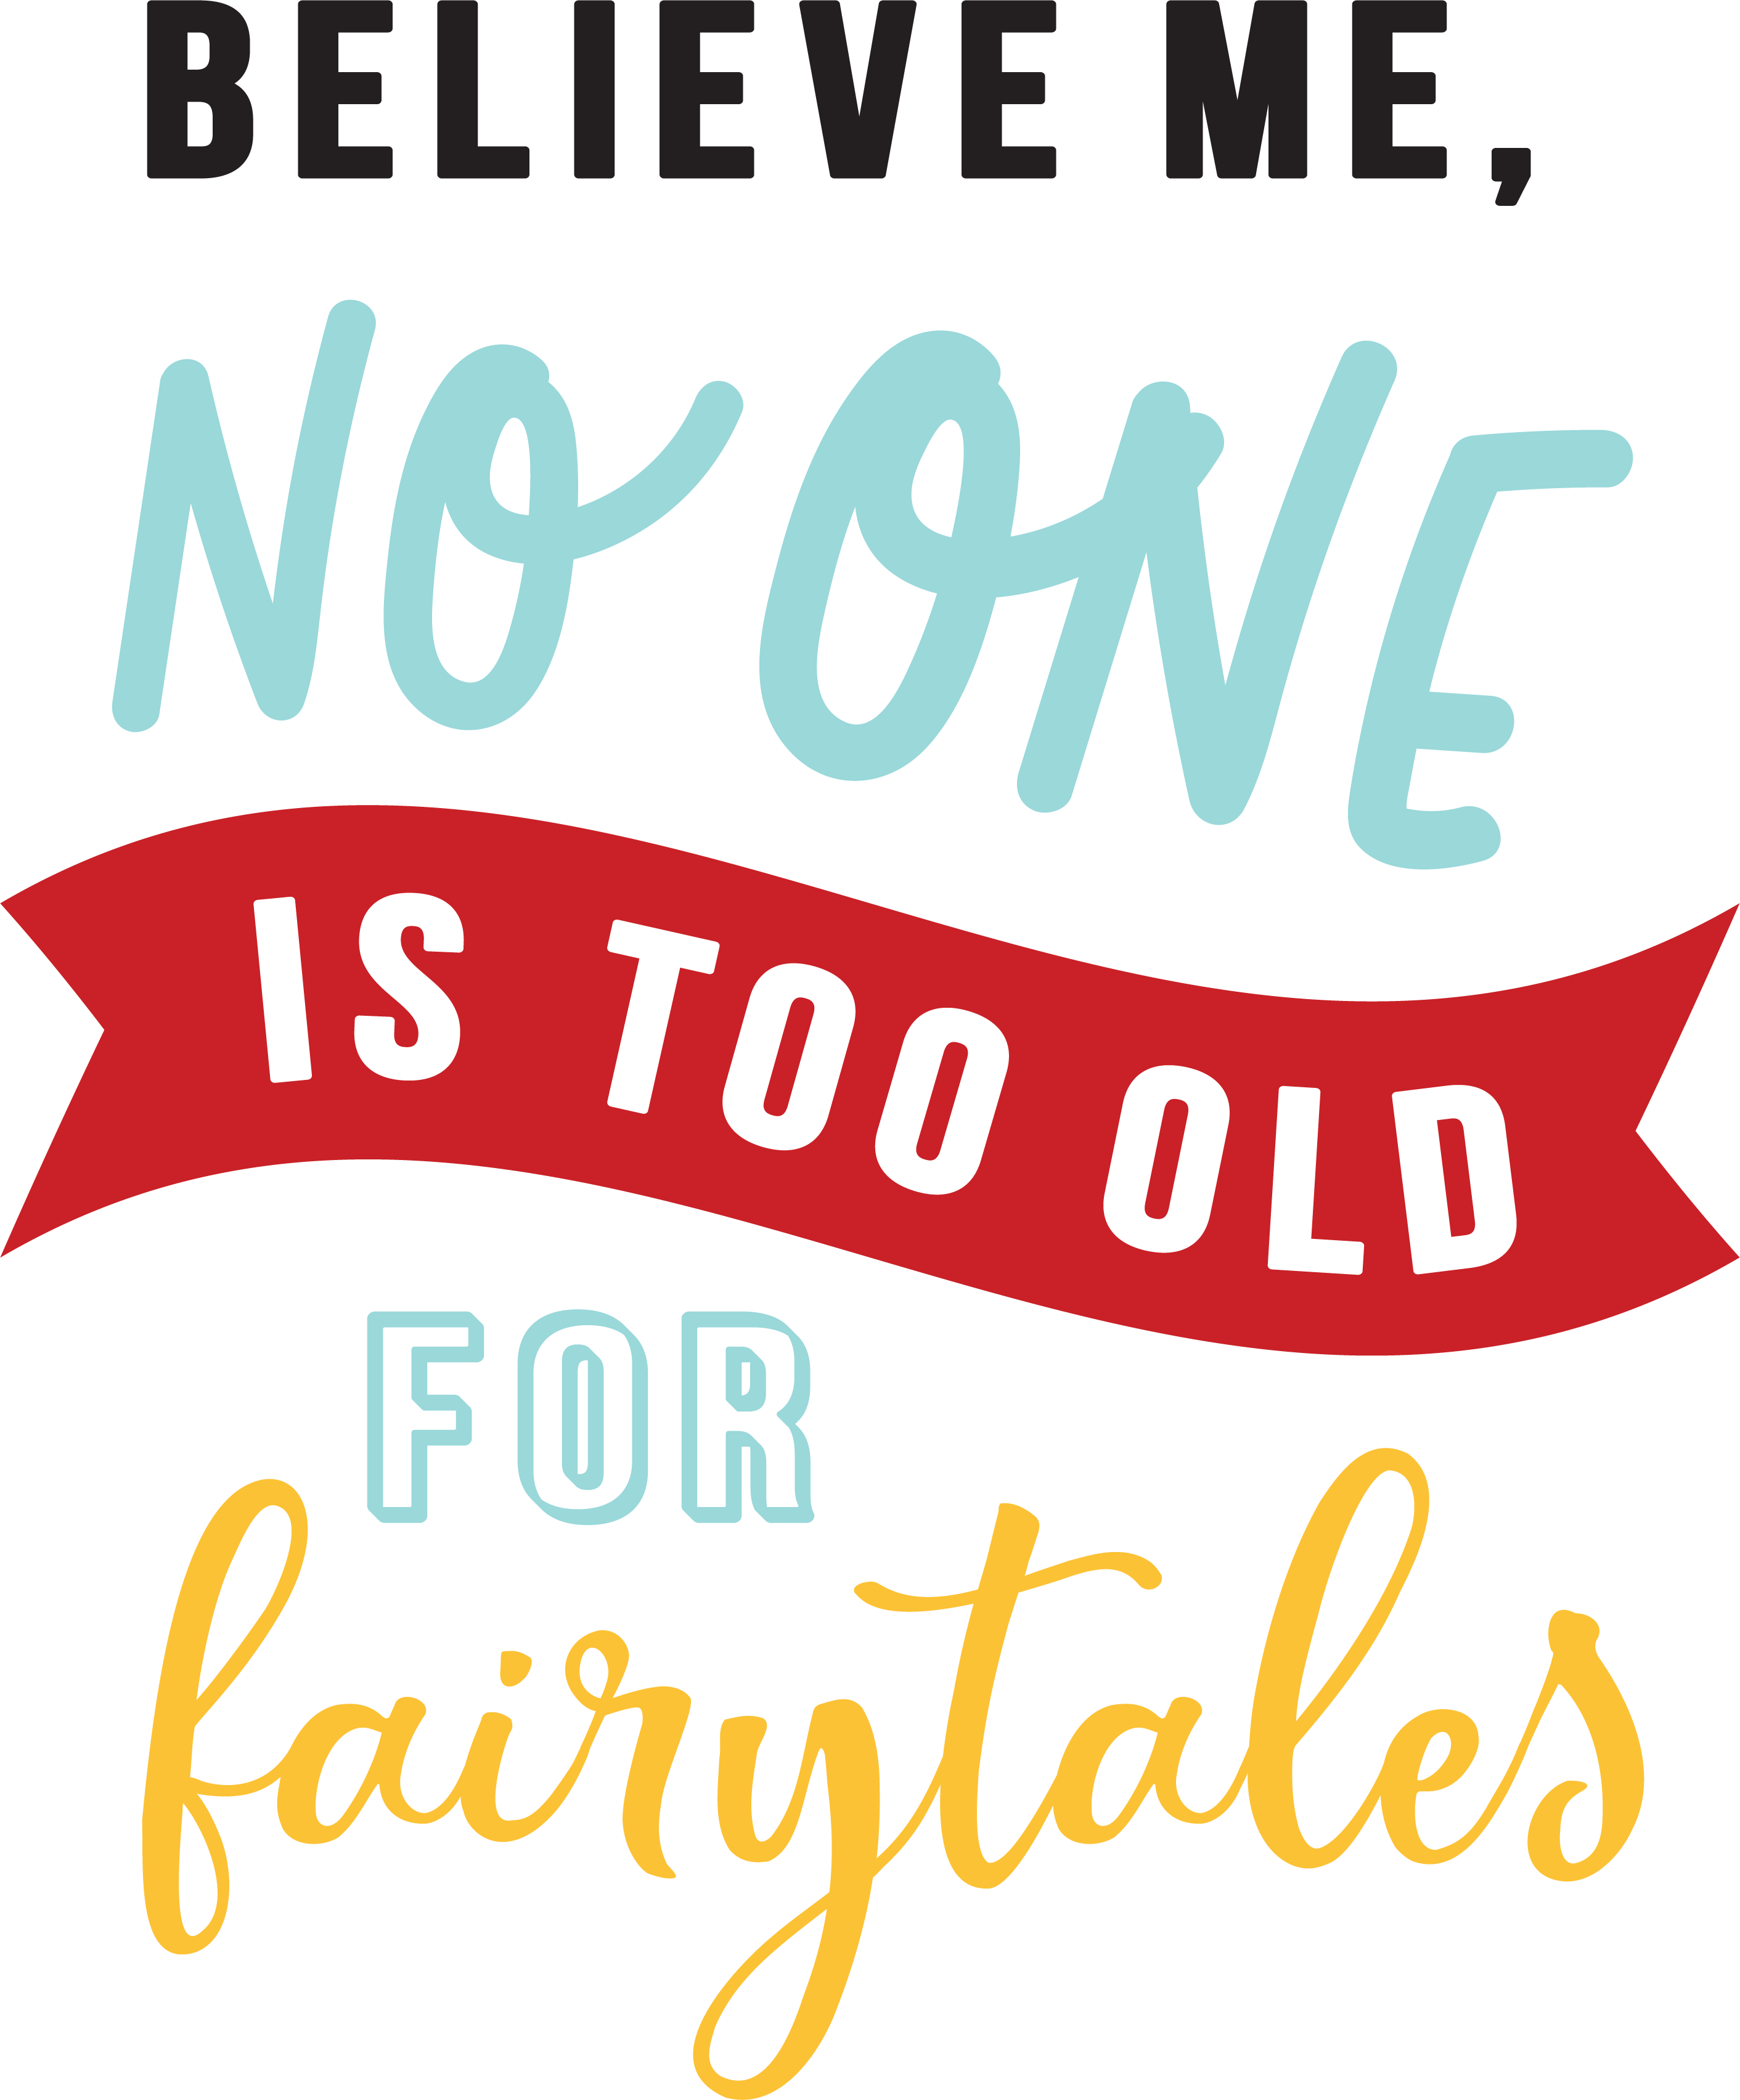 Believe Me, No One Is Too Old For Fairytales SVG Cut File